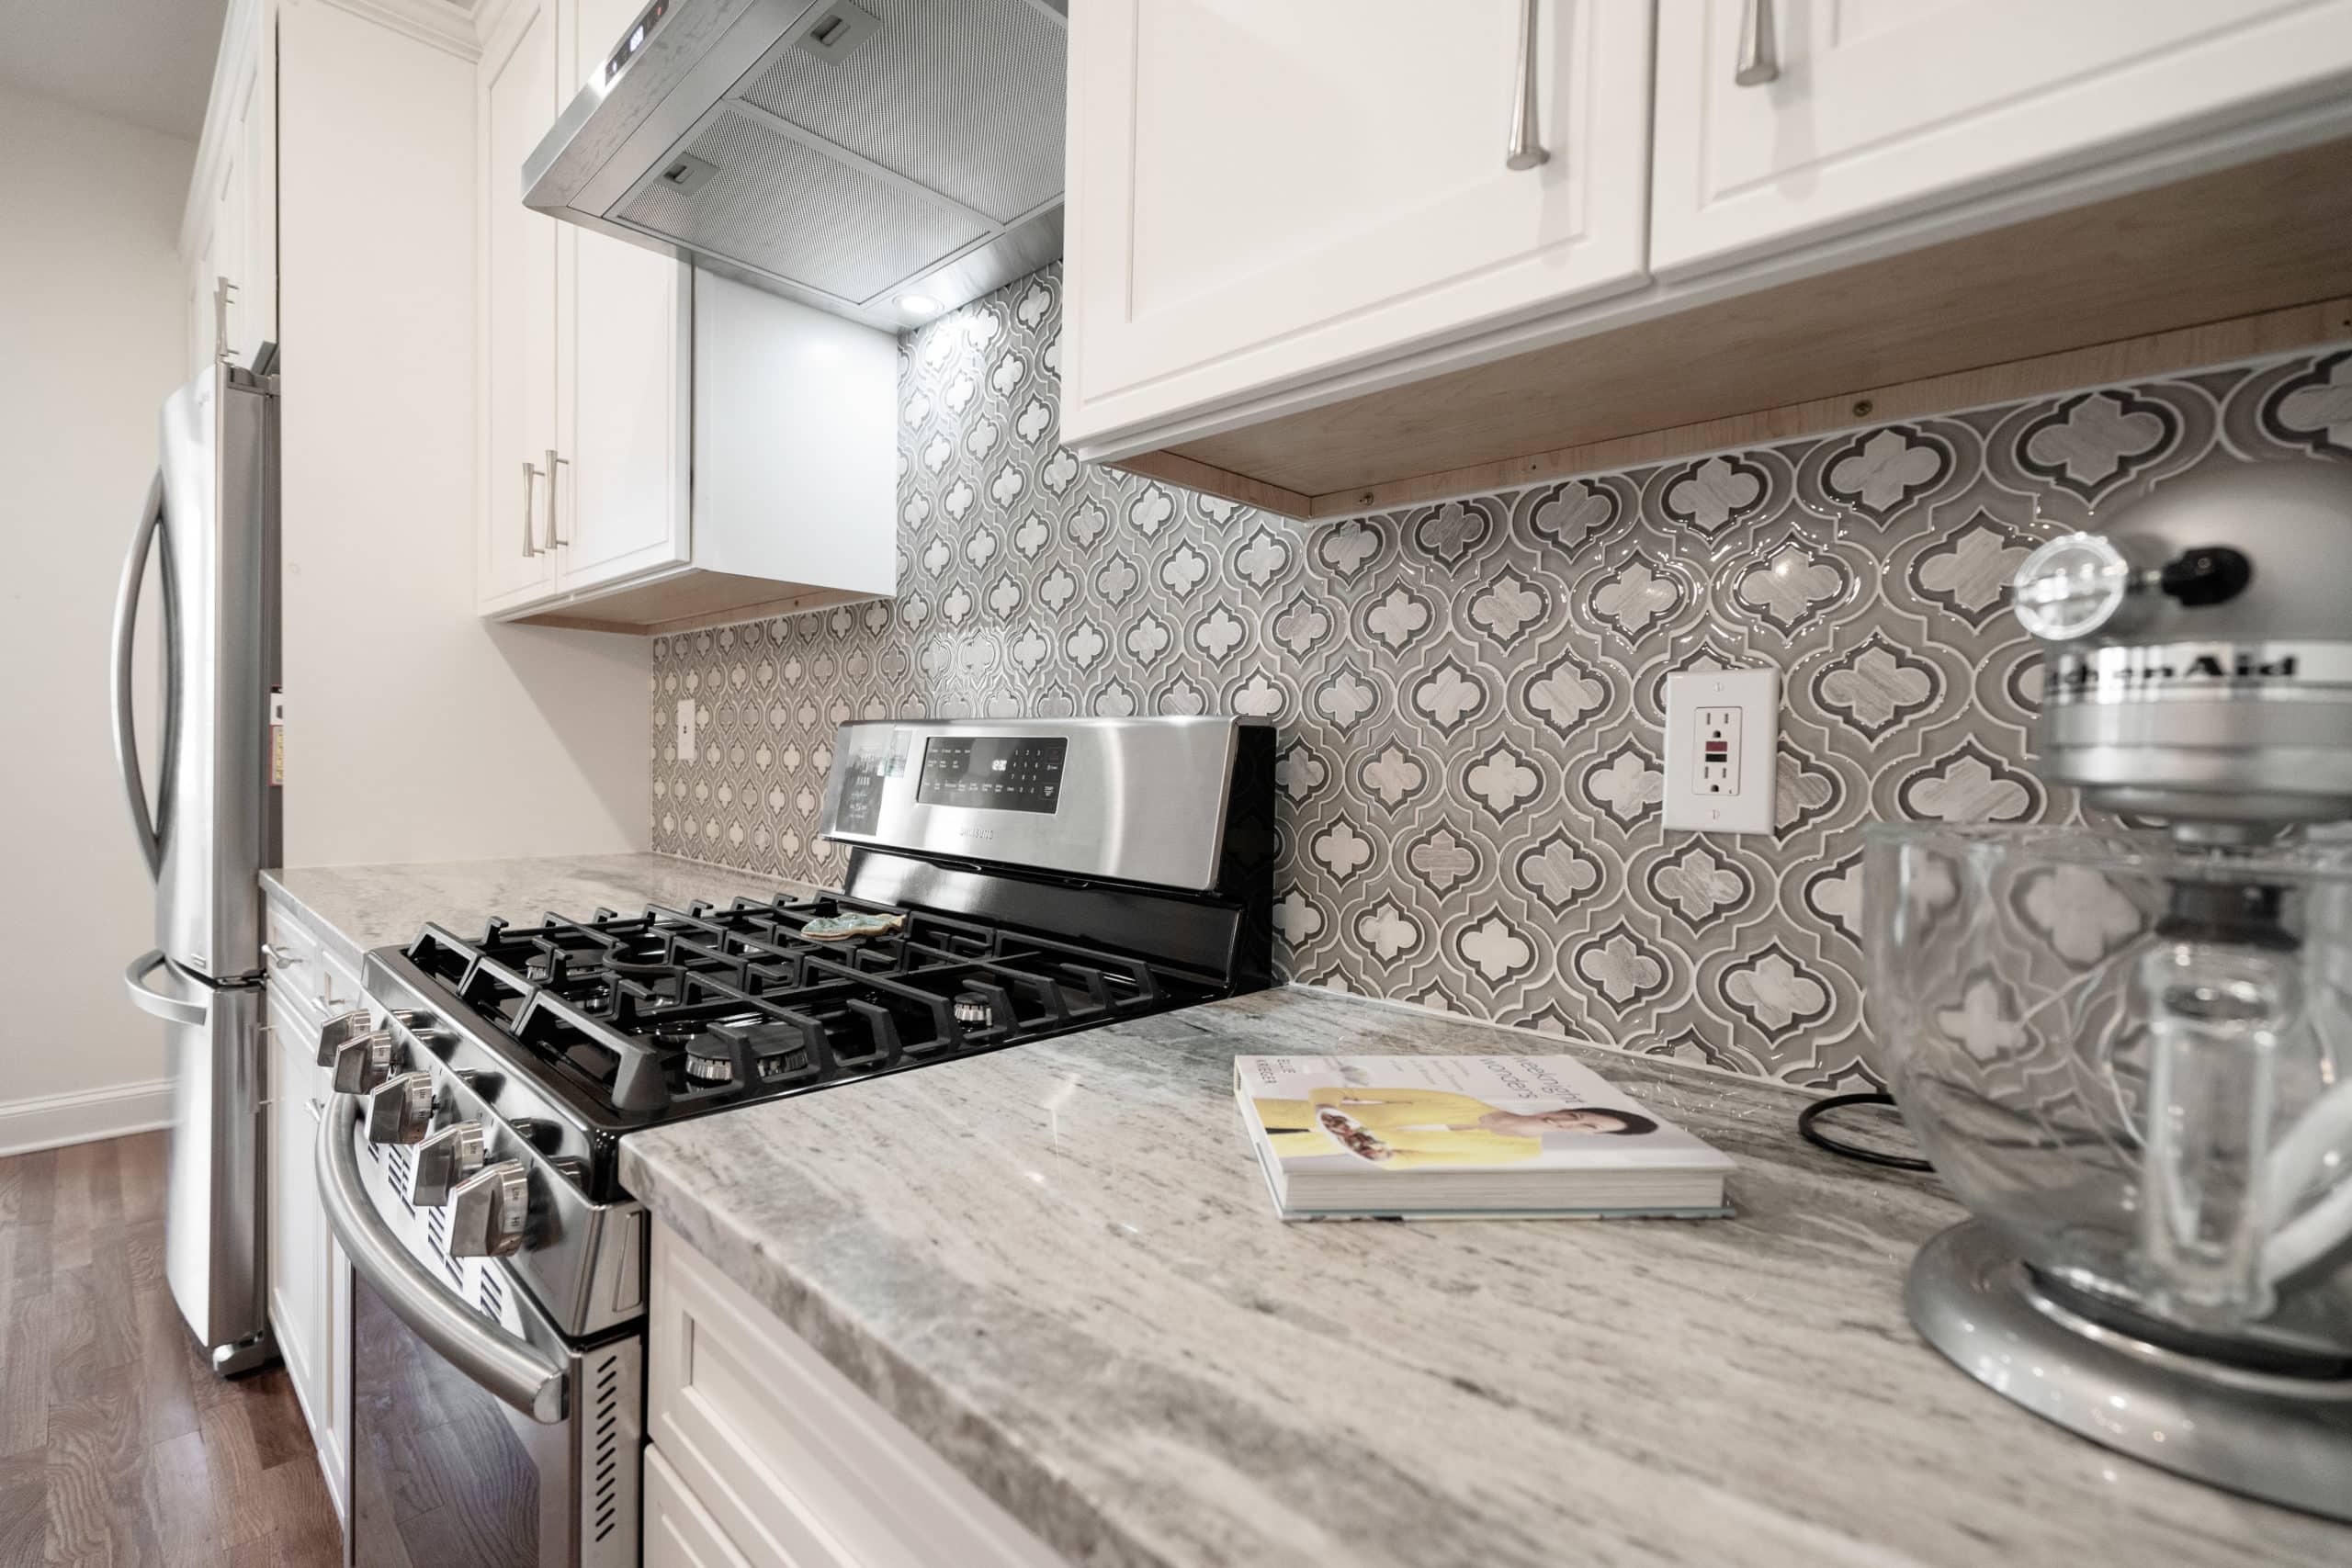 Clean kitchen style with white transitional kitchen cabinets, gray backsplash, and gray countertop